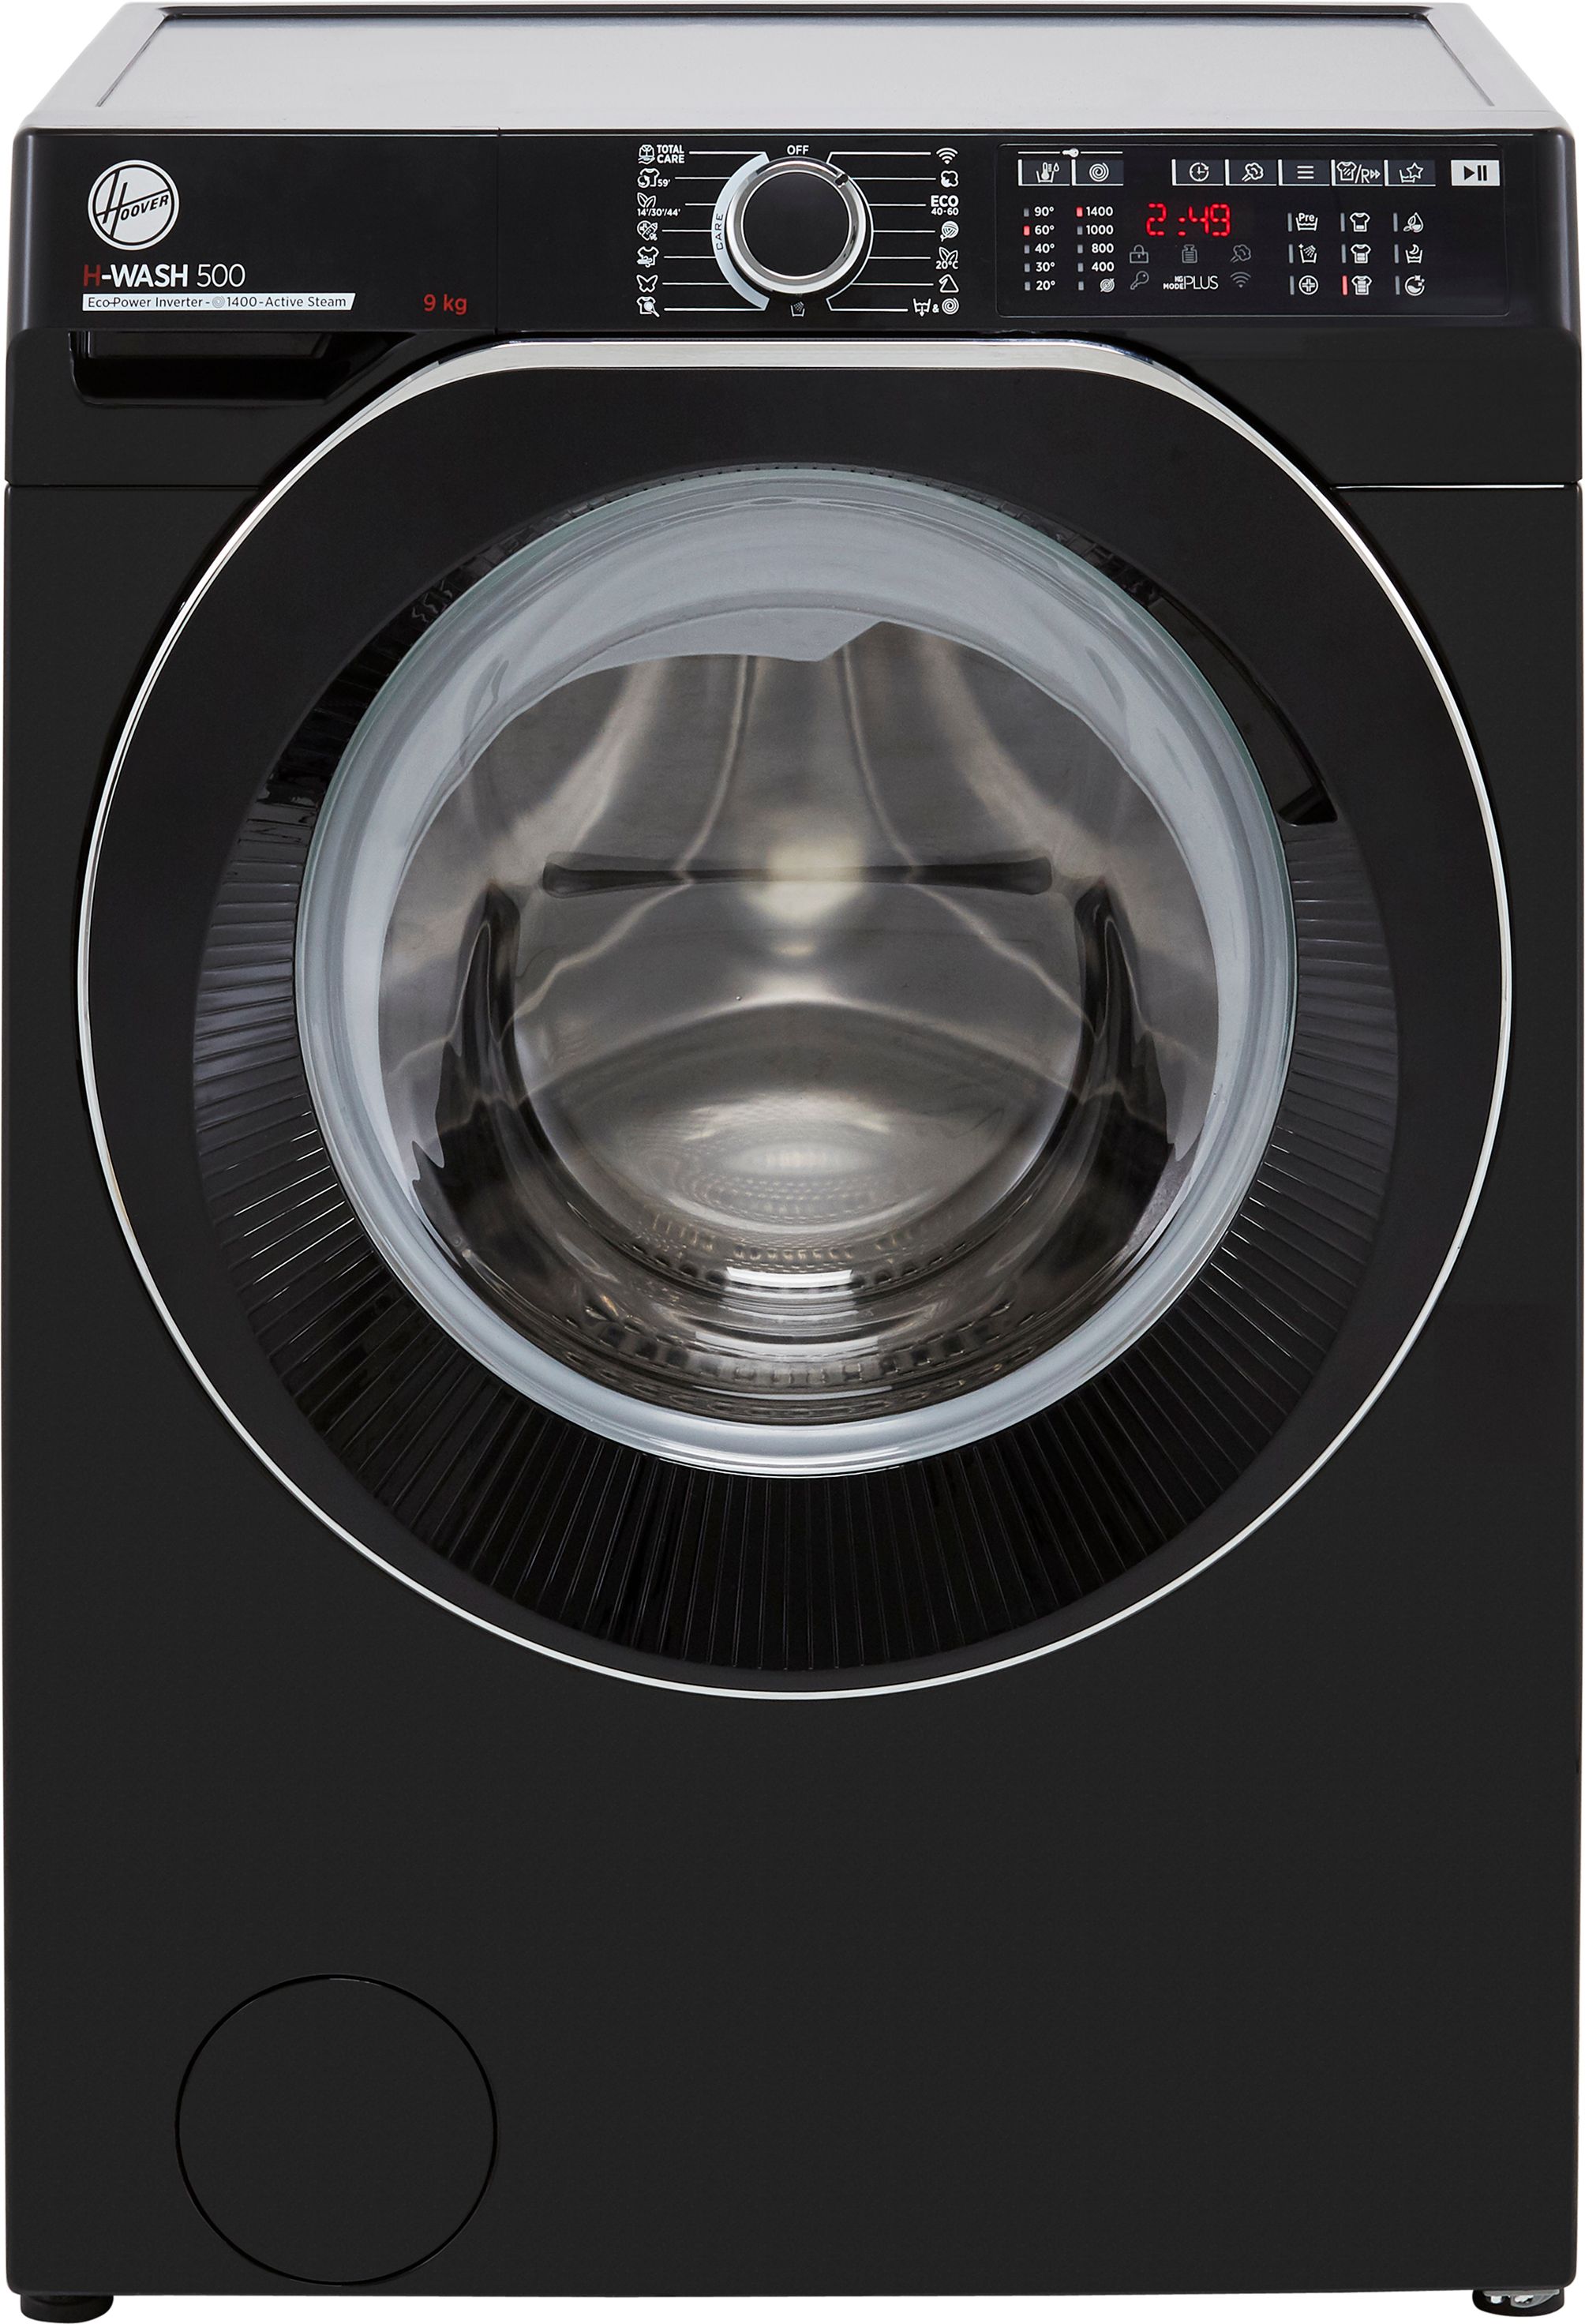 Hoover H-WASH 500 HW49AMBCB1 9kg Washing Machine with 1400 rpm - Black - A Rated Black